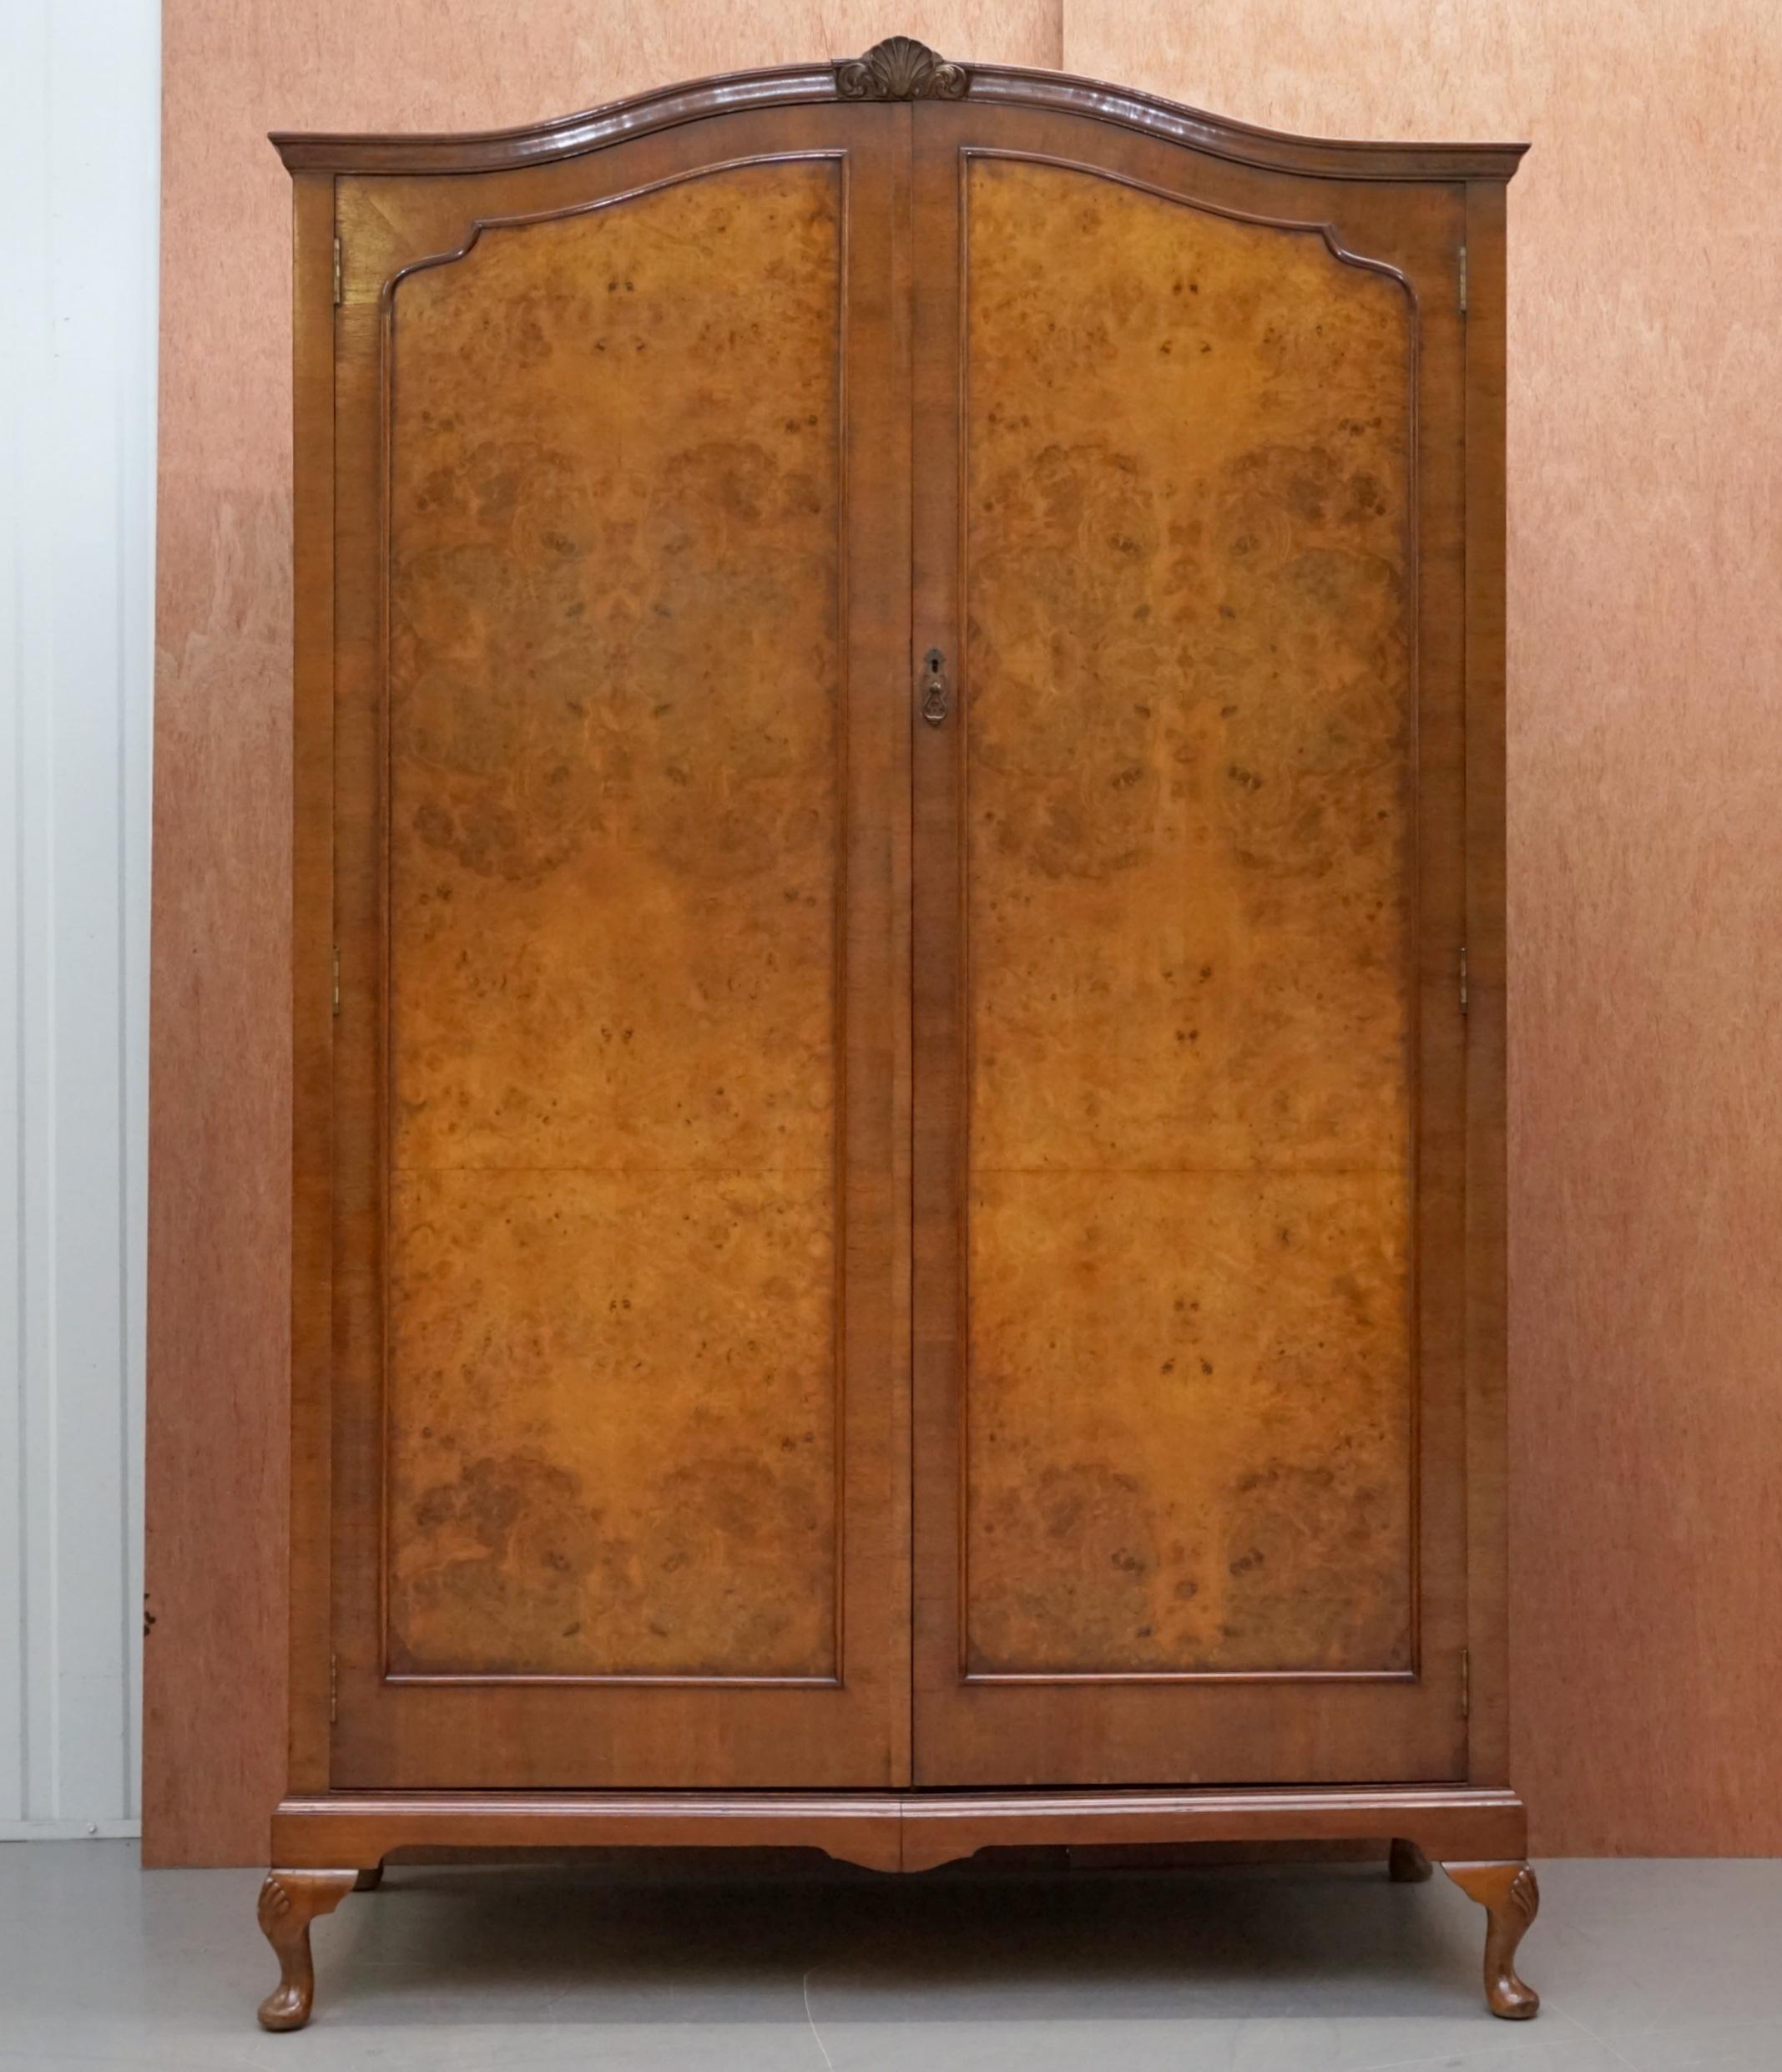 We are delighted to offer for sale this stunning large double circa 1930s figured walnut wardrobe 

This wardrobe is a grand size, ideal for fitting a small chest of drawers inside or for those of use that have lots of long elegant dresses and